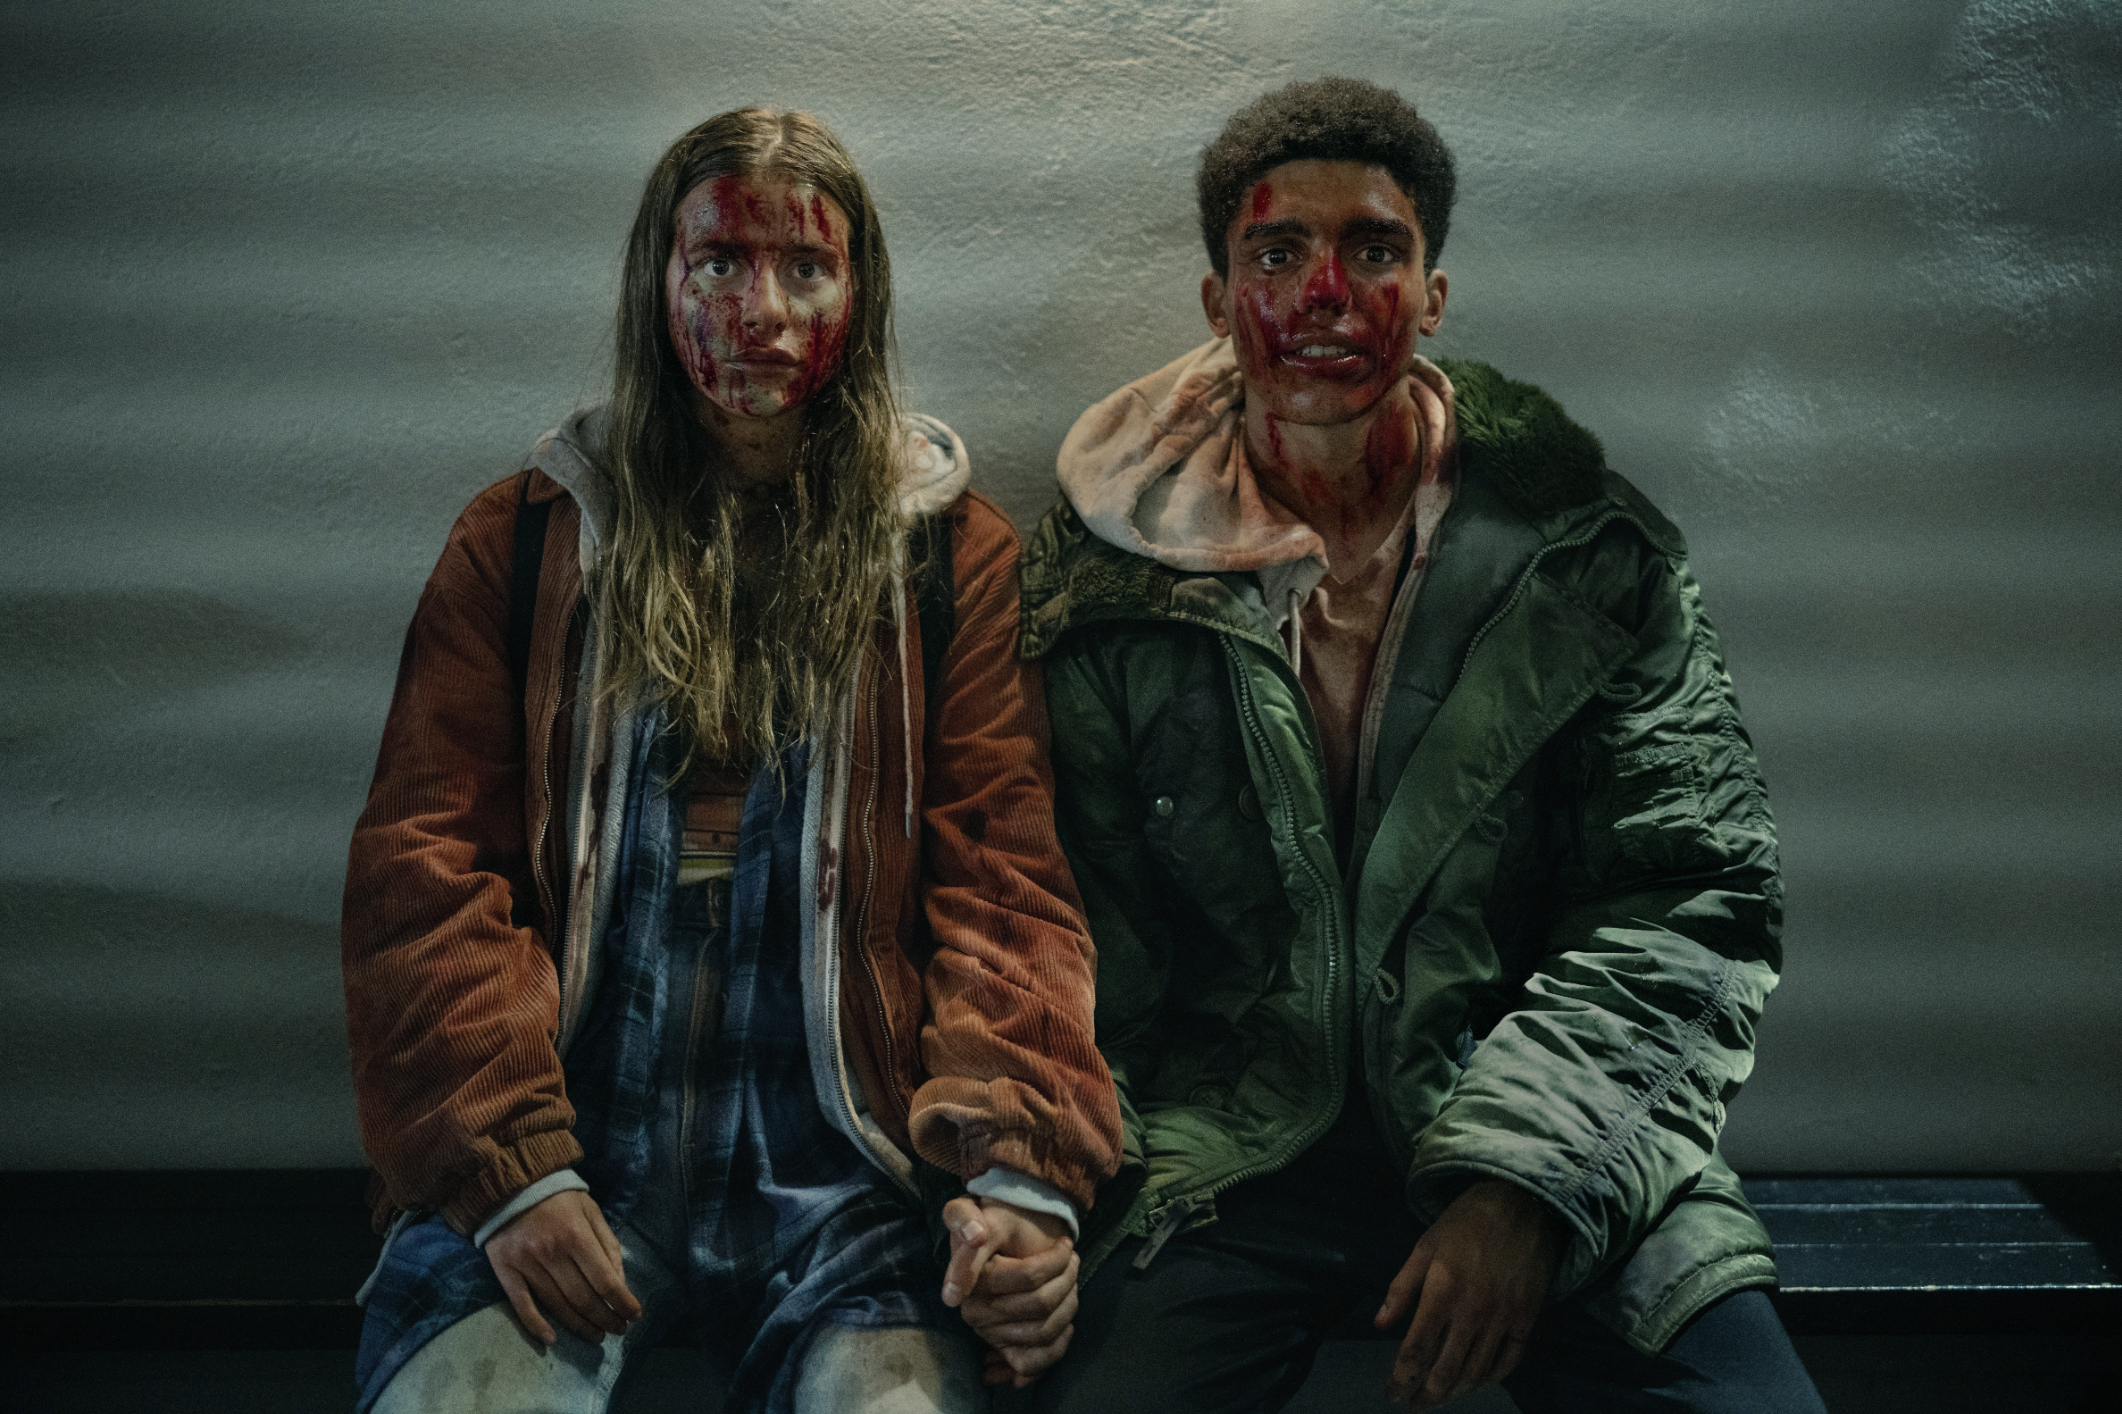 Two actors in distressed clothing, with dramatic makeup simulating injuries, sitting side by side